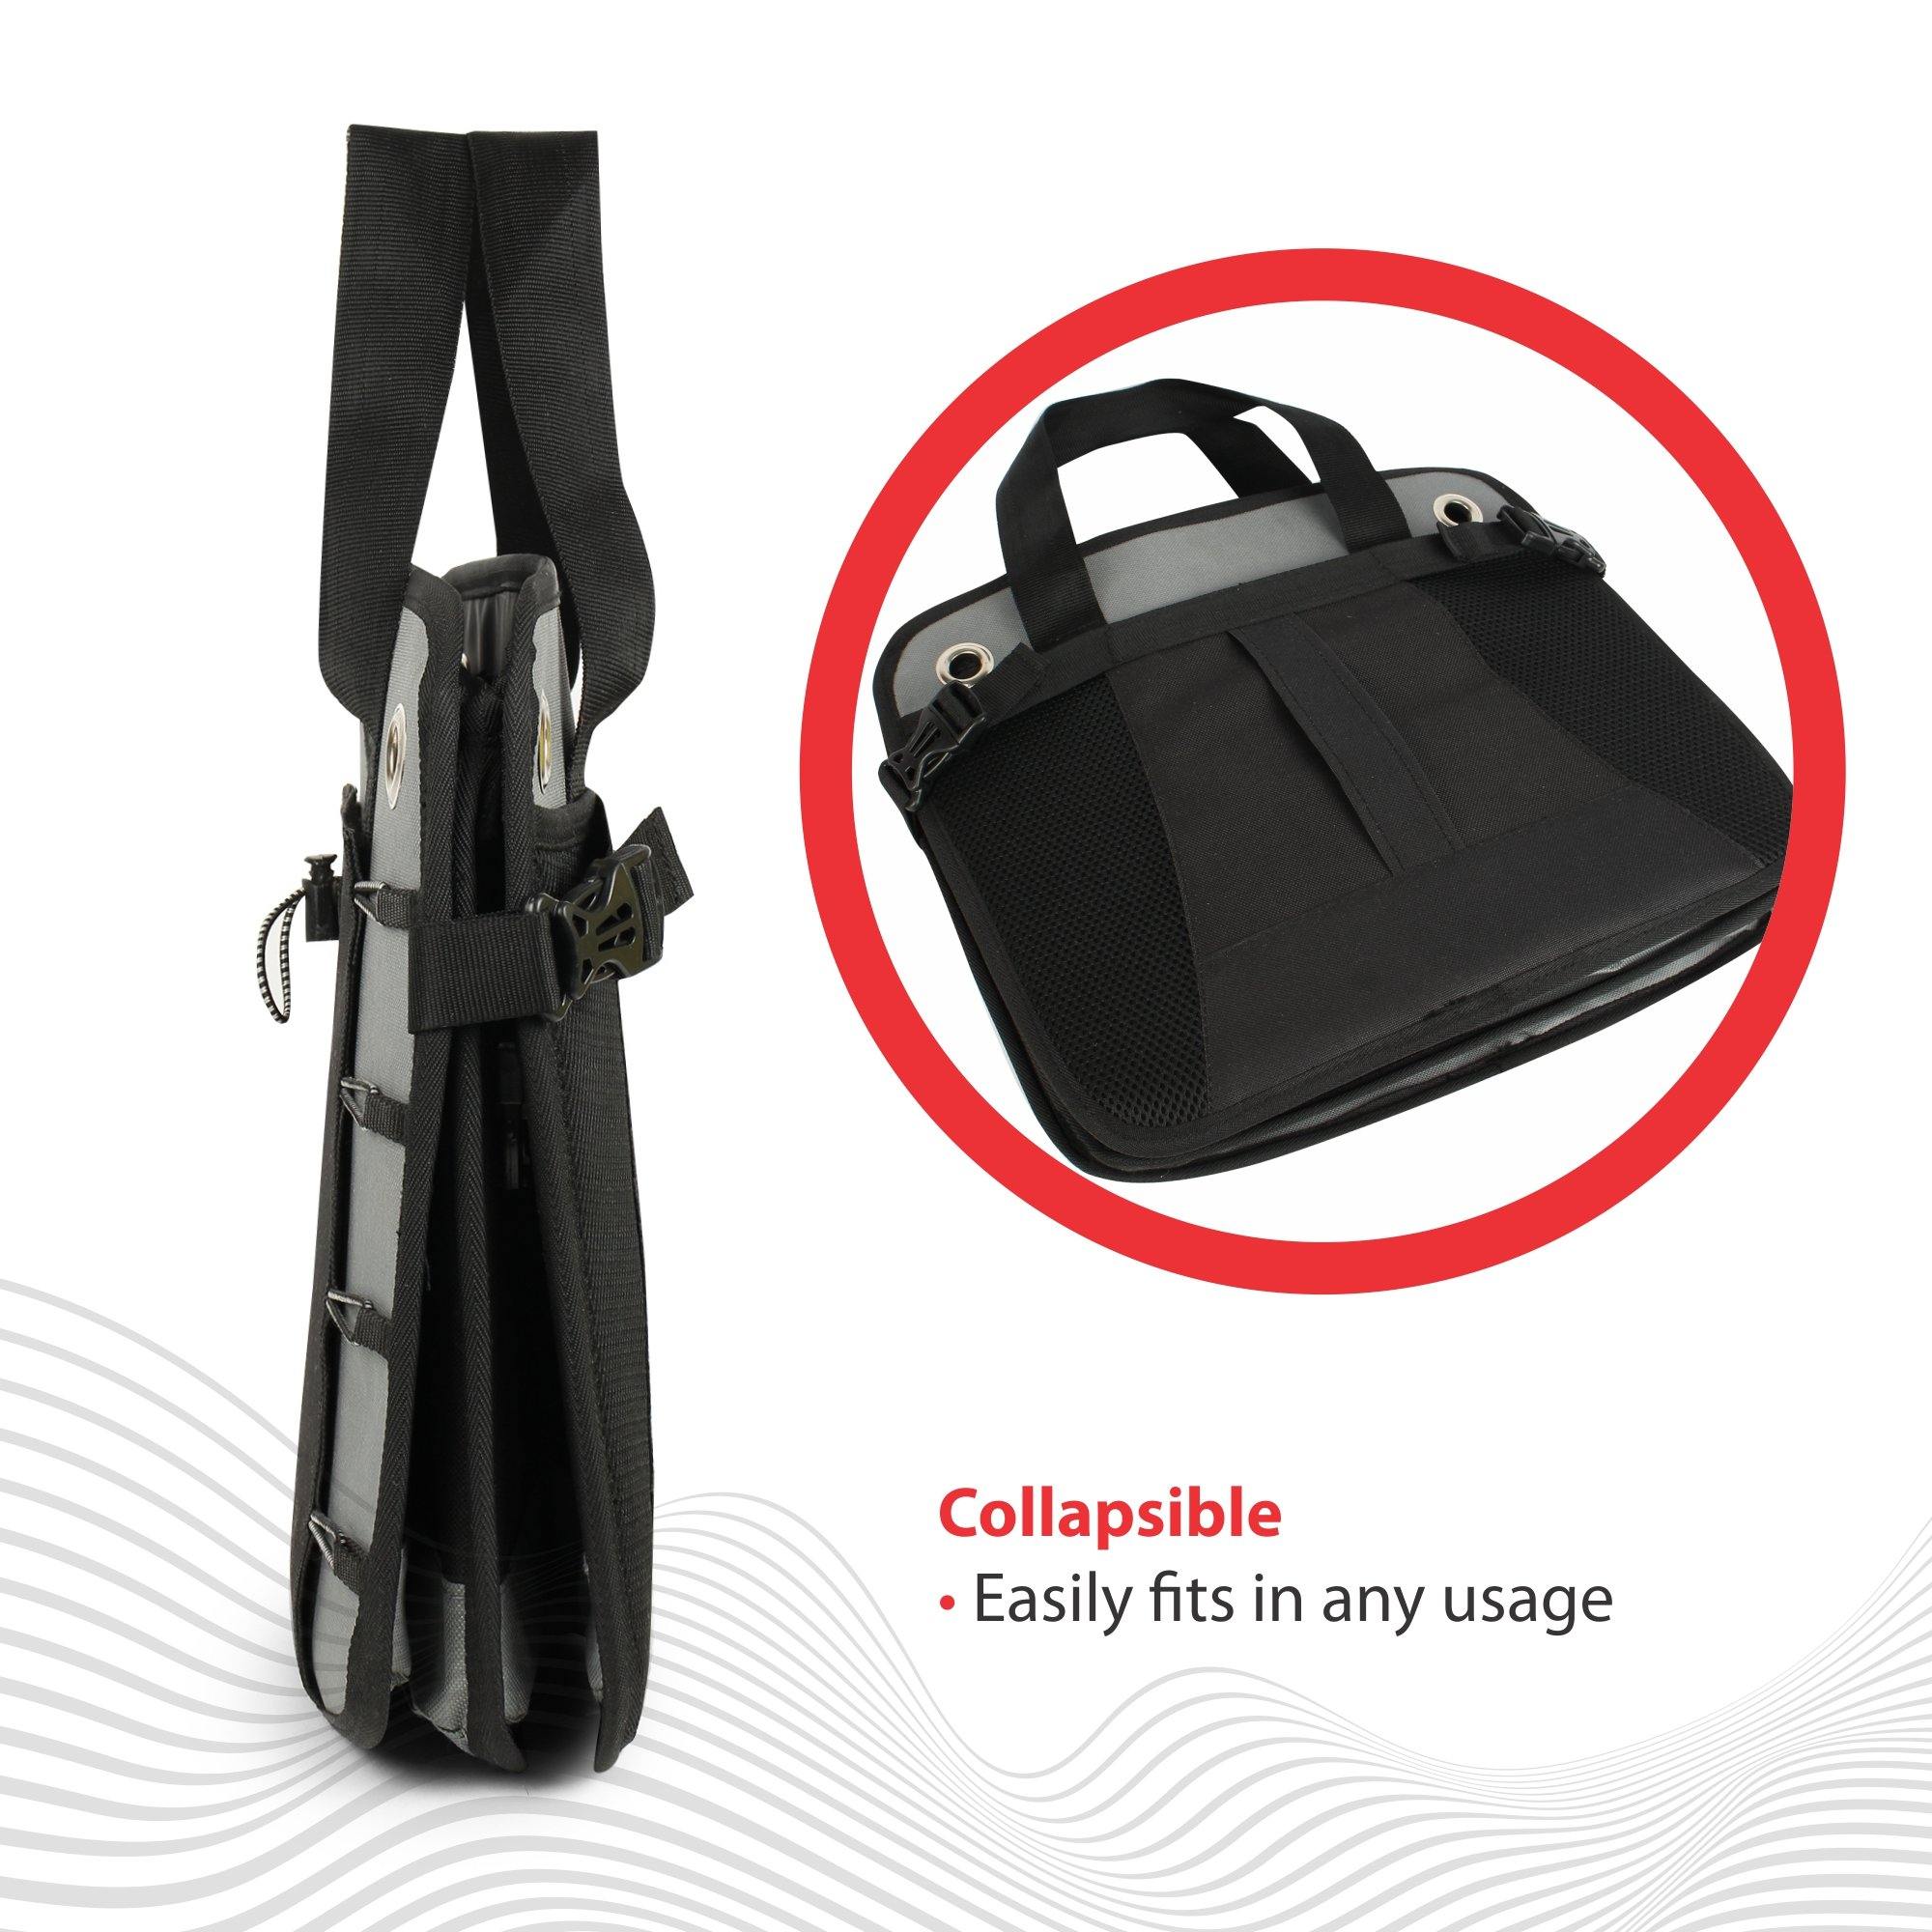 Double R Bags Multi Compartments Collapsible Portable Car Boot Organizer Black Grey - Double R Bags